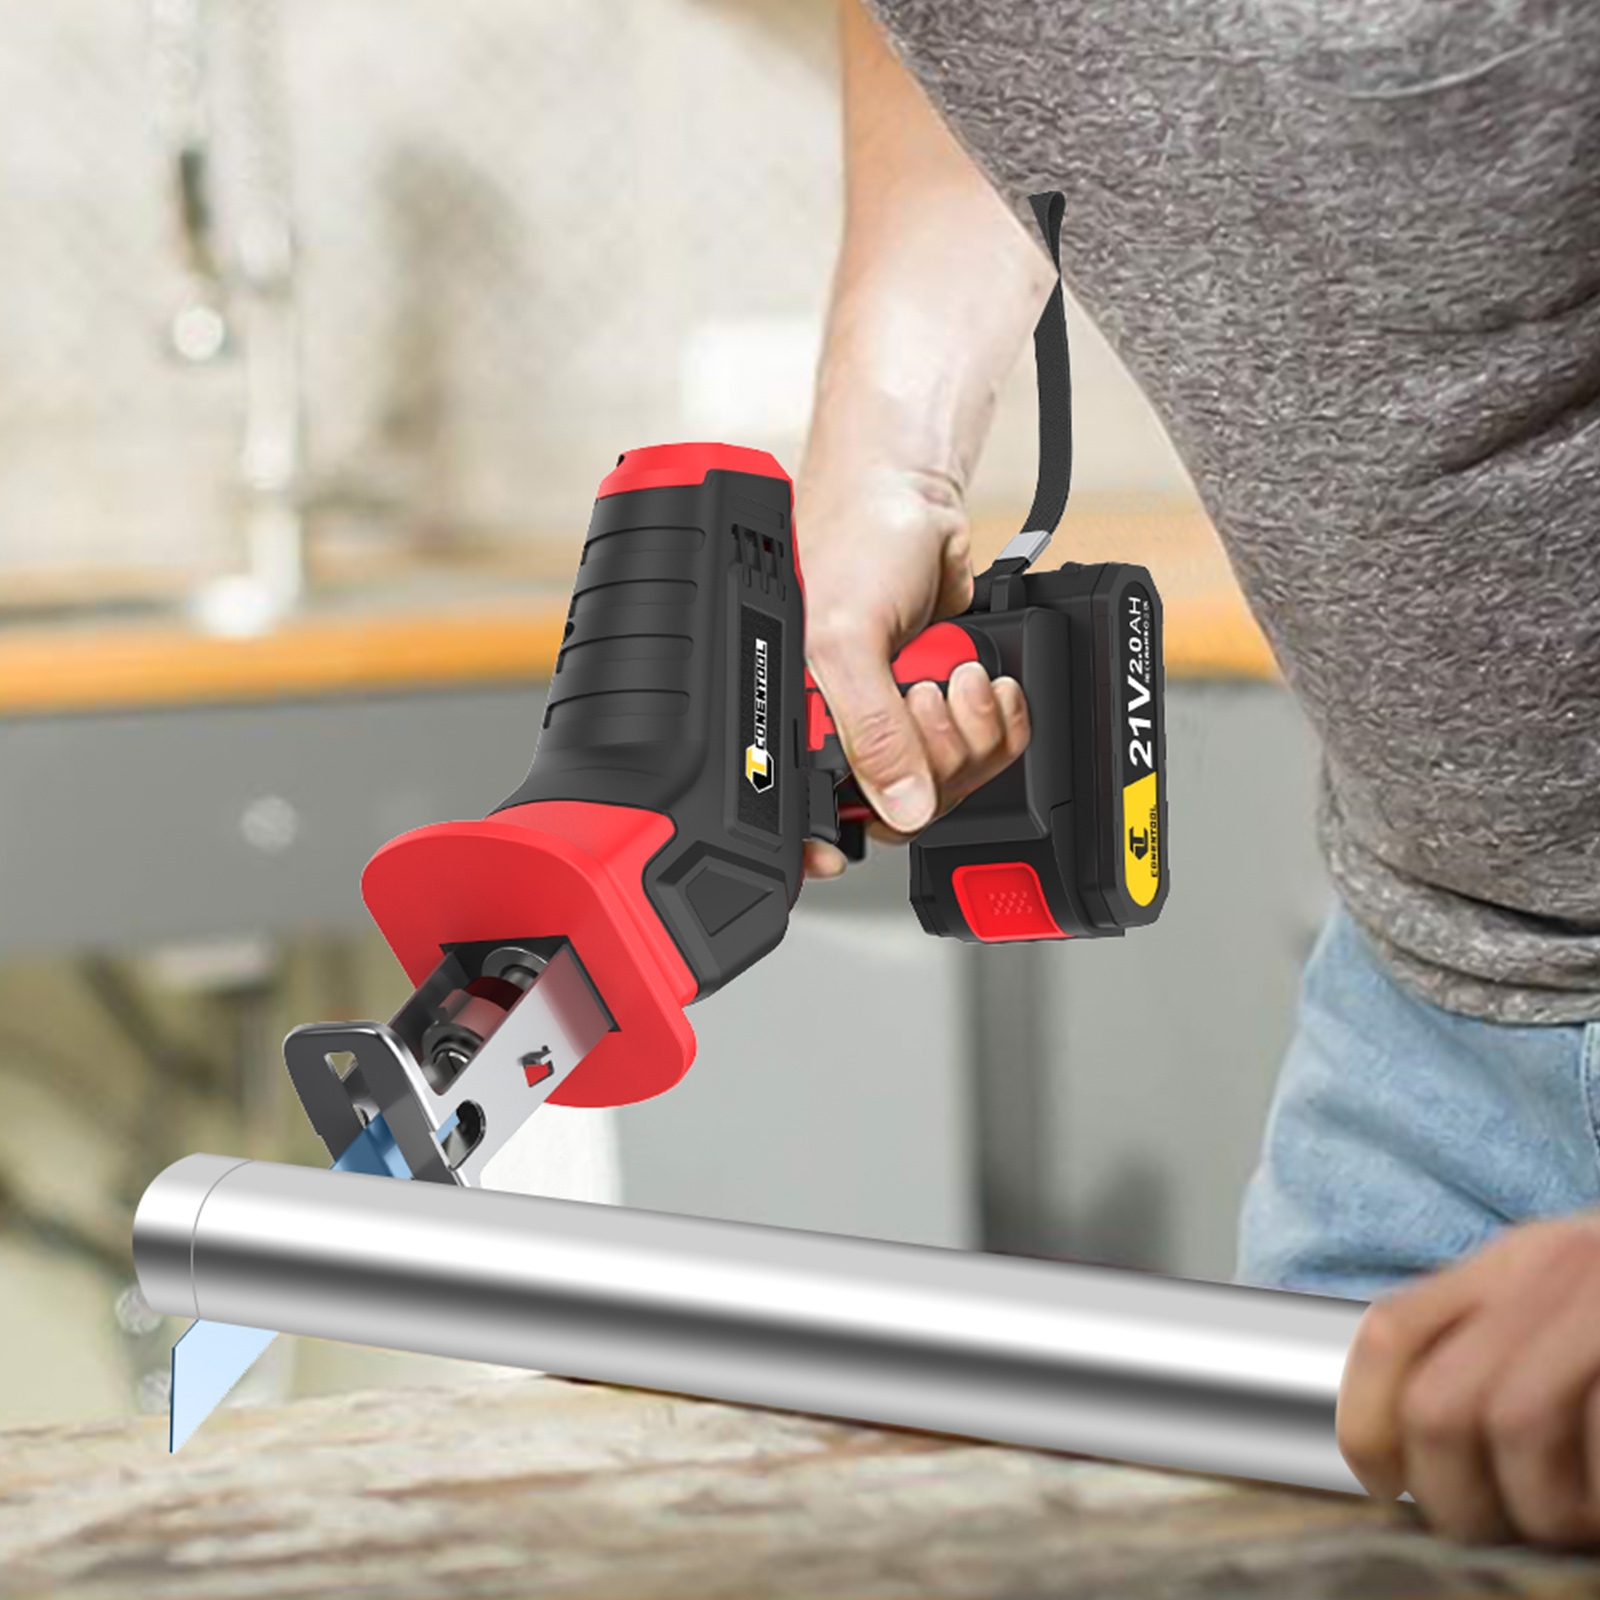 Conentool 21V Cordless Reciprocating Saw -load Speed 3800rpmWith  Rechargeable Battery, Wood Saw Blade, Metal Saw Blade,Electric Hand Saw 